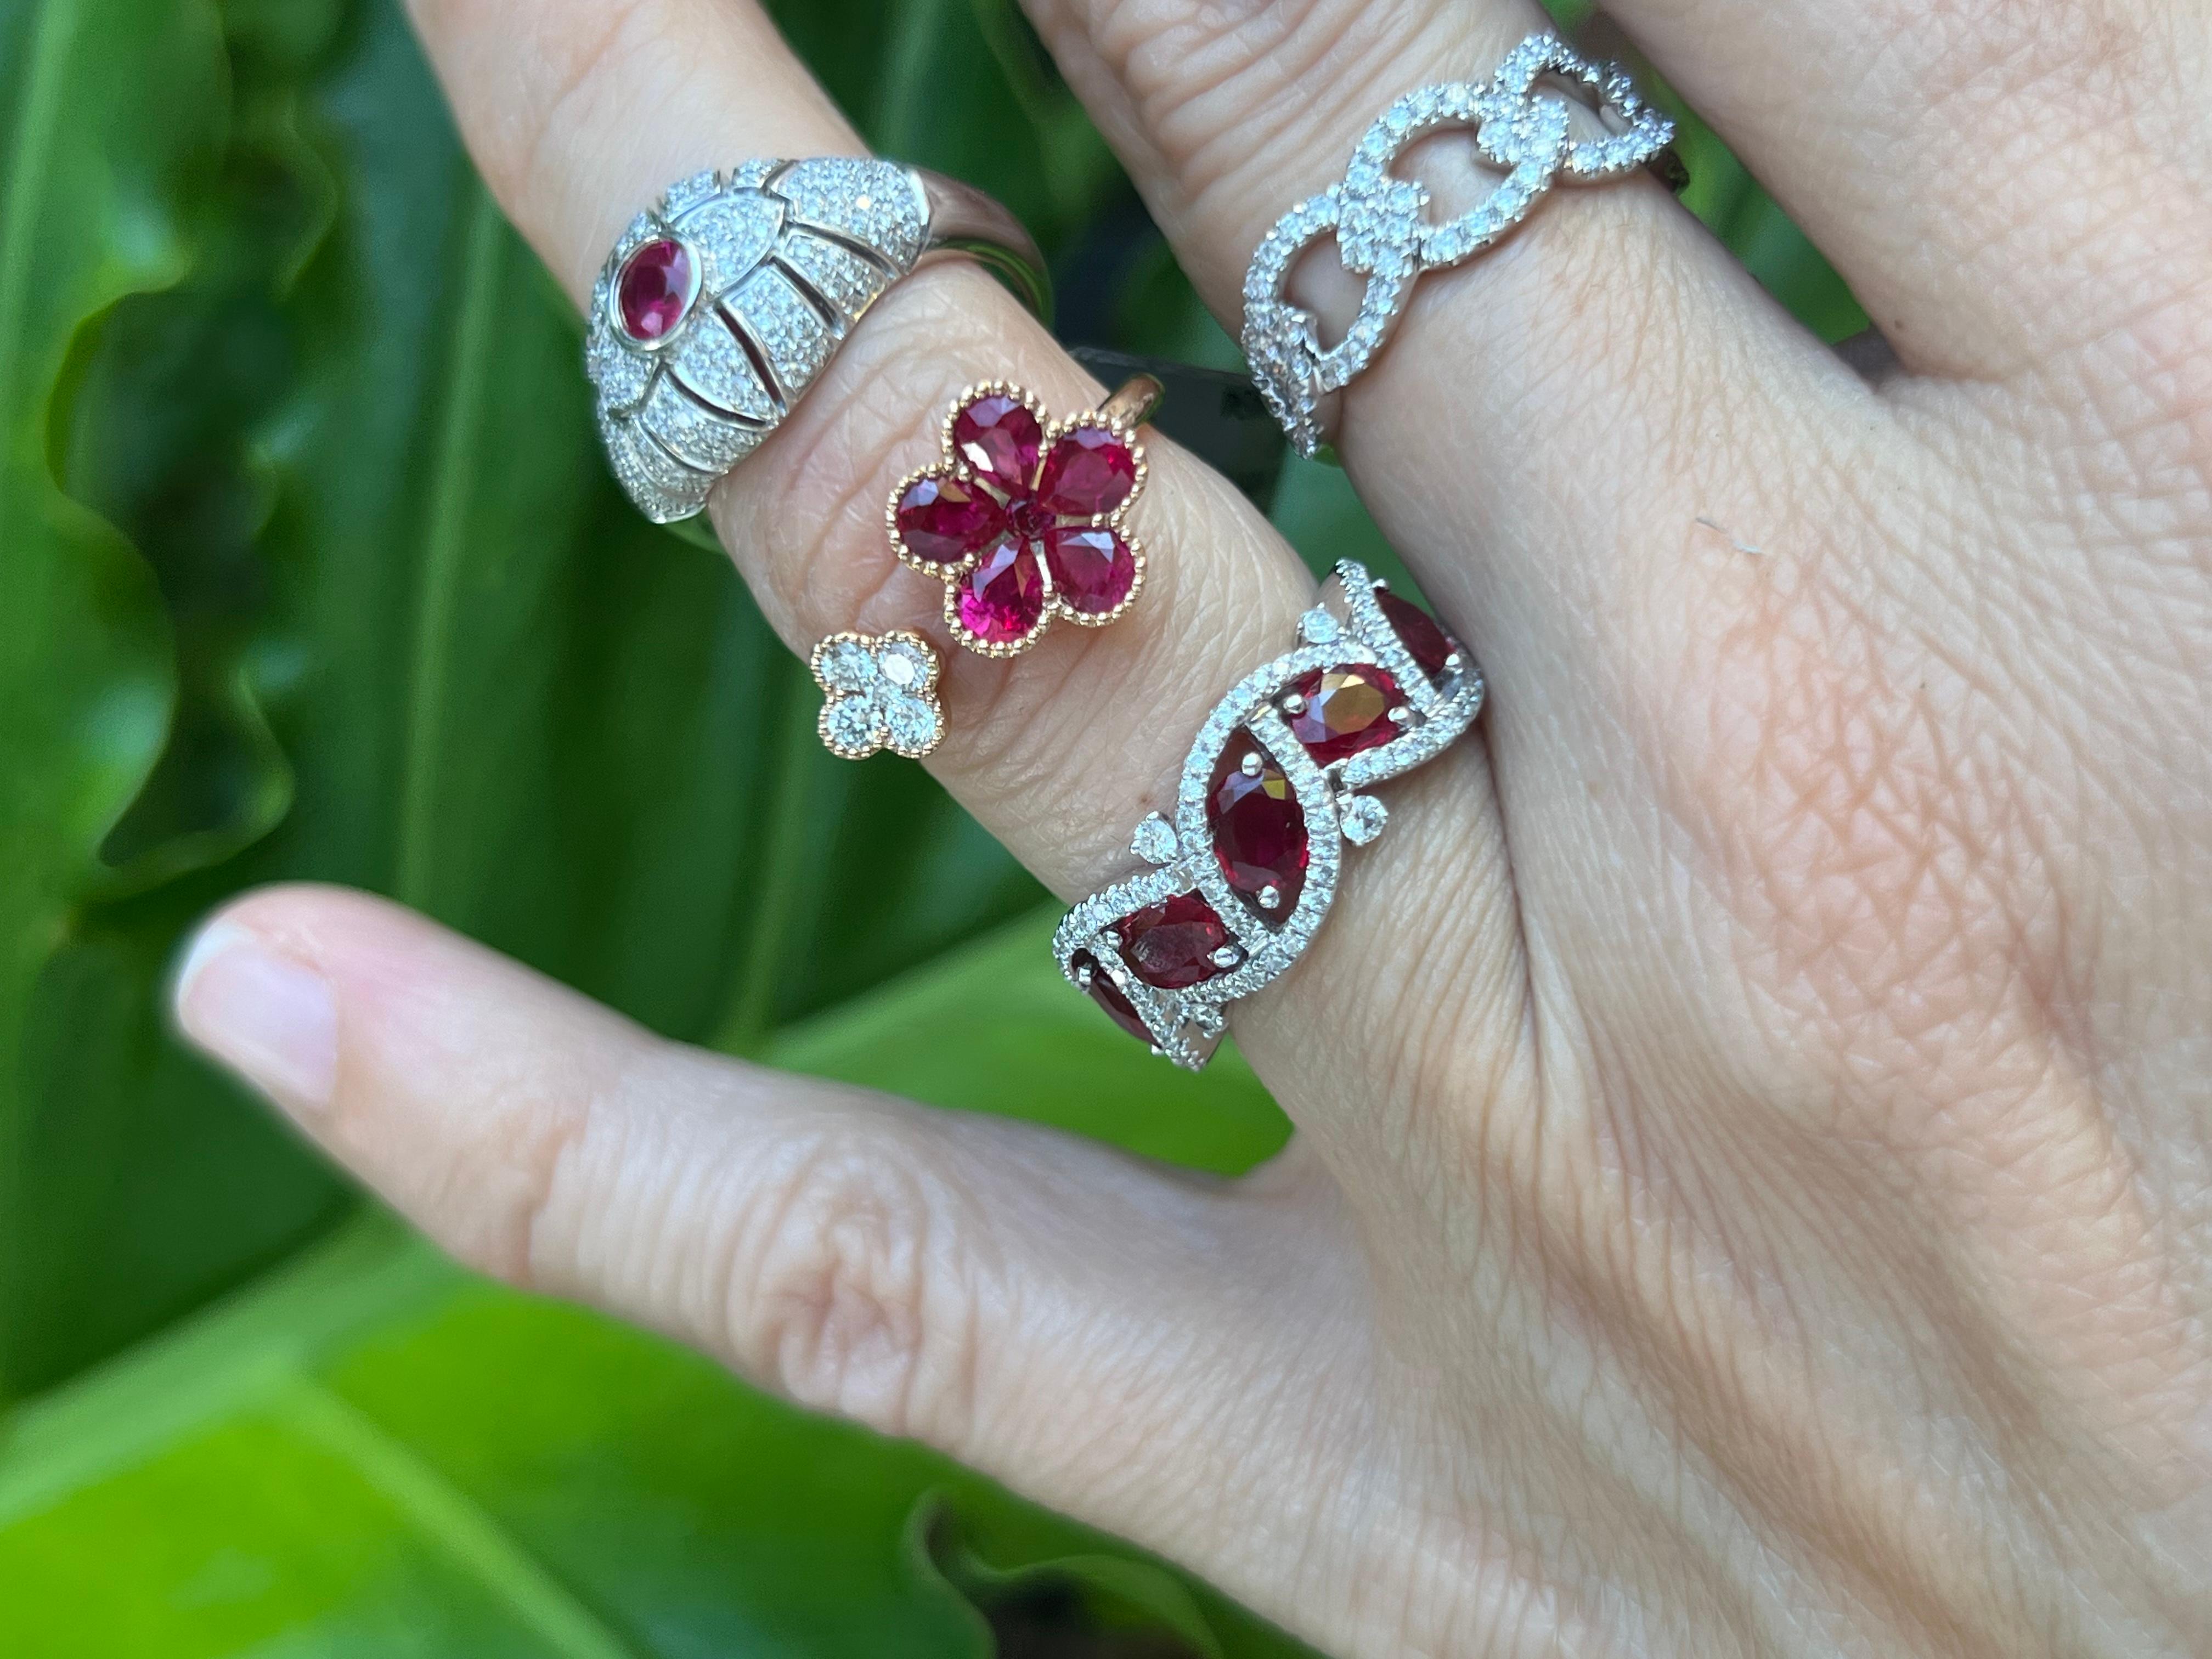 Oval rubies mounted on prongs create a whimsical vine design accented with diamonds on 18K white gold. 

Features
18K white gold
1.70 carat total weight in rubies
0.42 carat total weight in diamonds
Ring size 6. Can be sized 2 numbers up or down